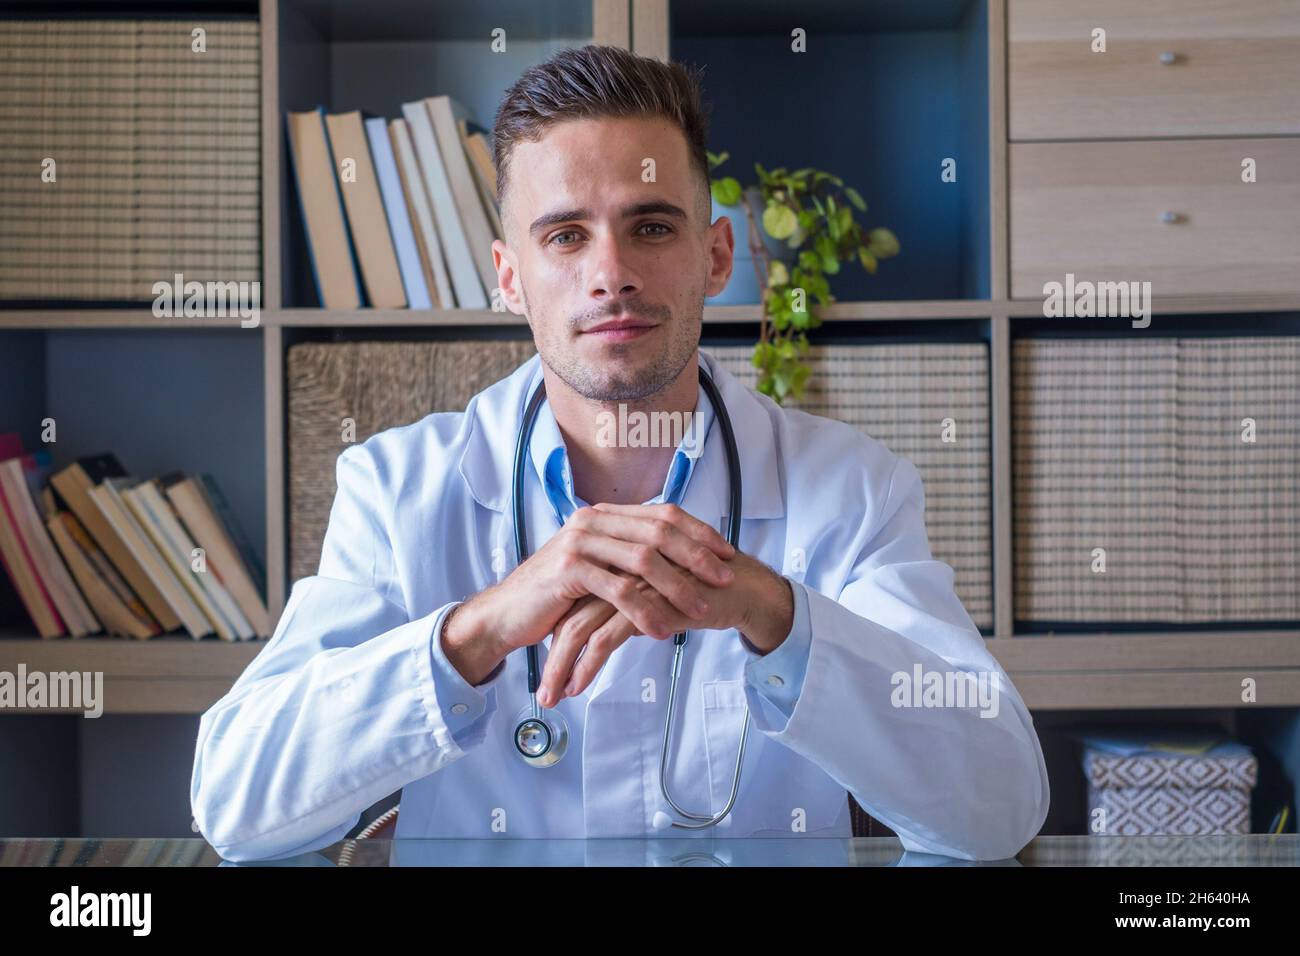 headshot portrait of smiling young male gp or physician in white medical uniform and glasses look at camera posing in hospital,happy caucasian man doctor show confidence skills in clinic workplace Stock Photo